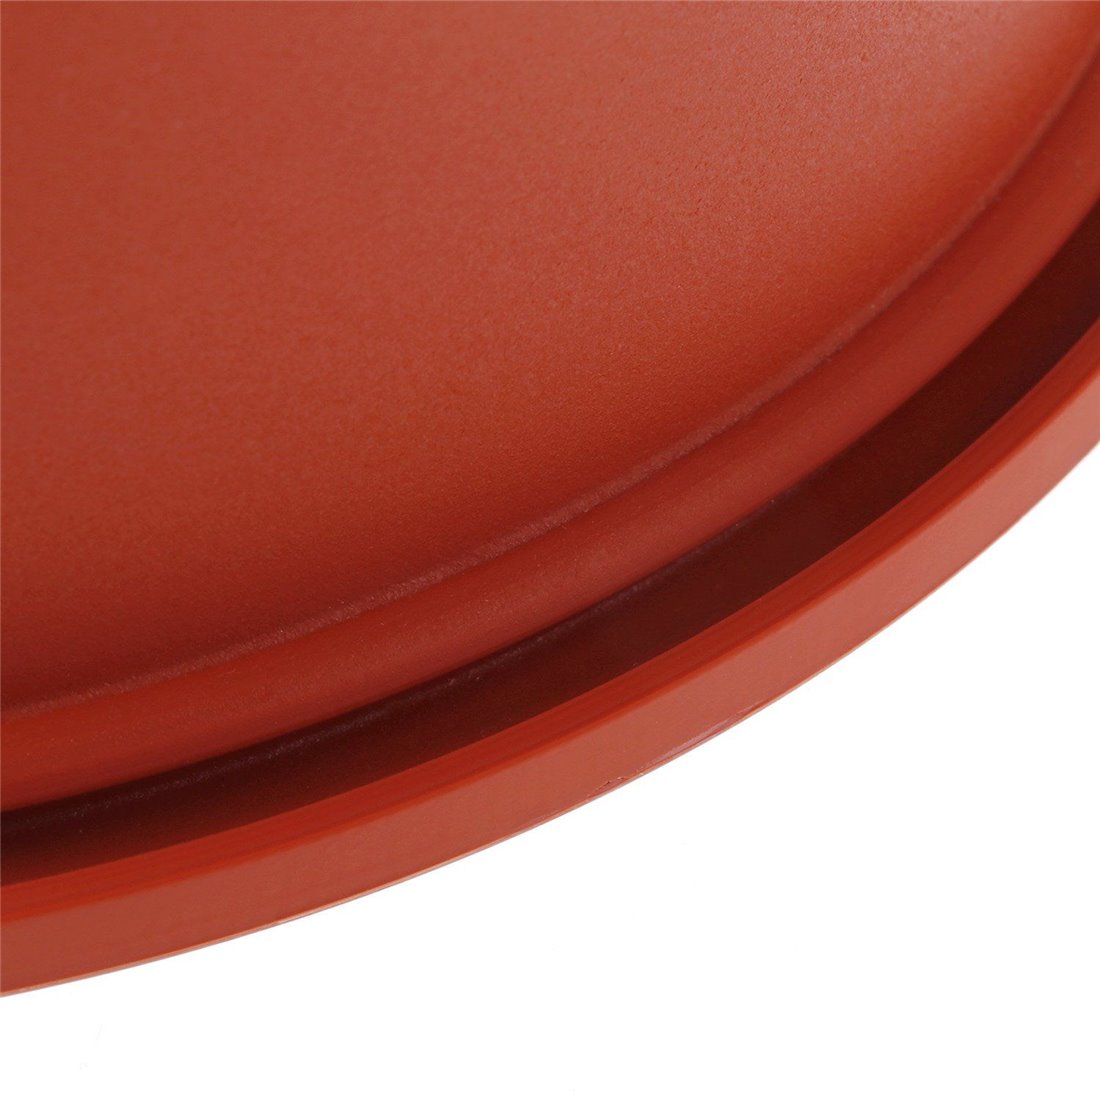 Silikomart 20.180.00.0060 SFT180 Moule Forme Ronde Silicone Terre Cuite